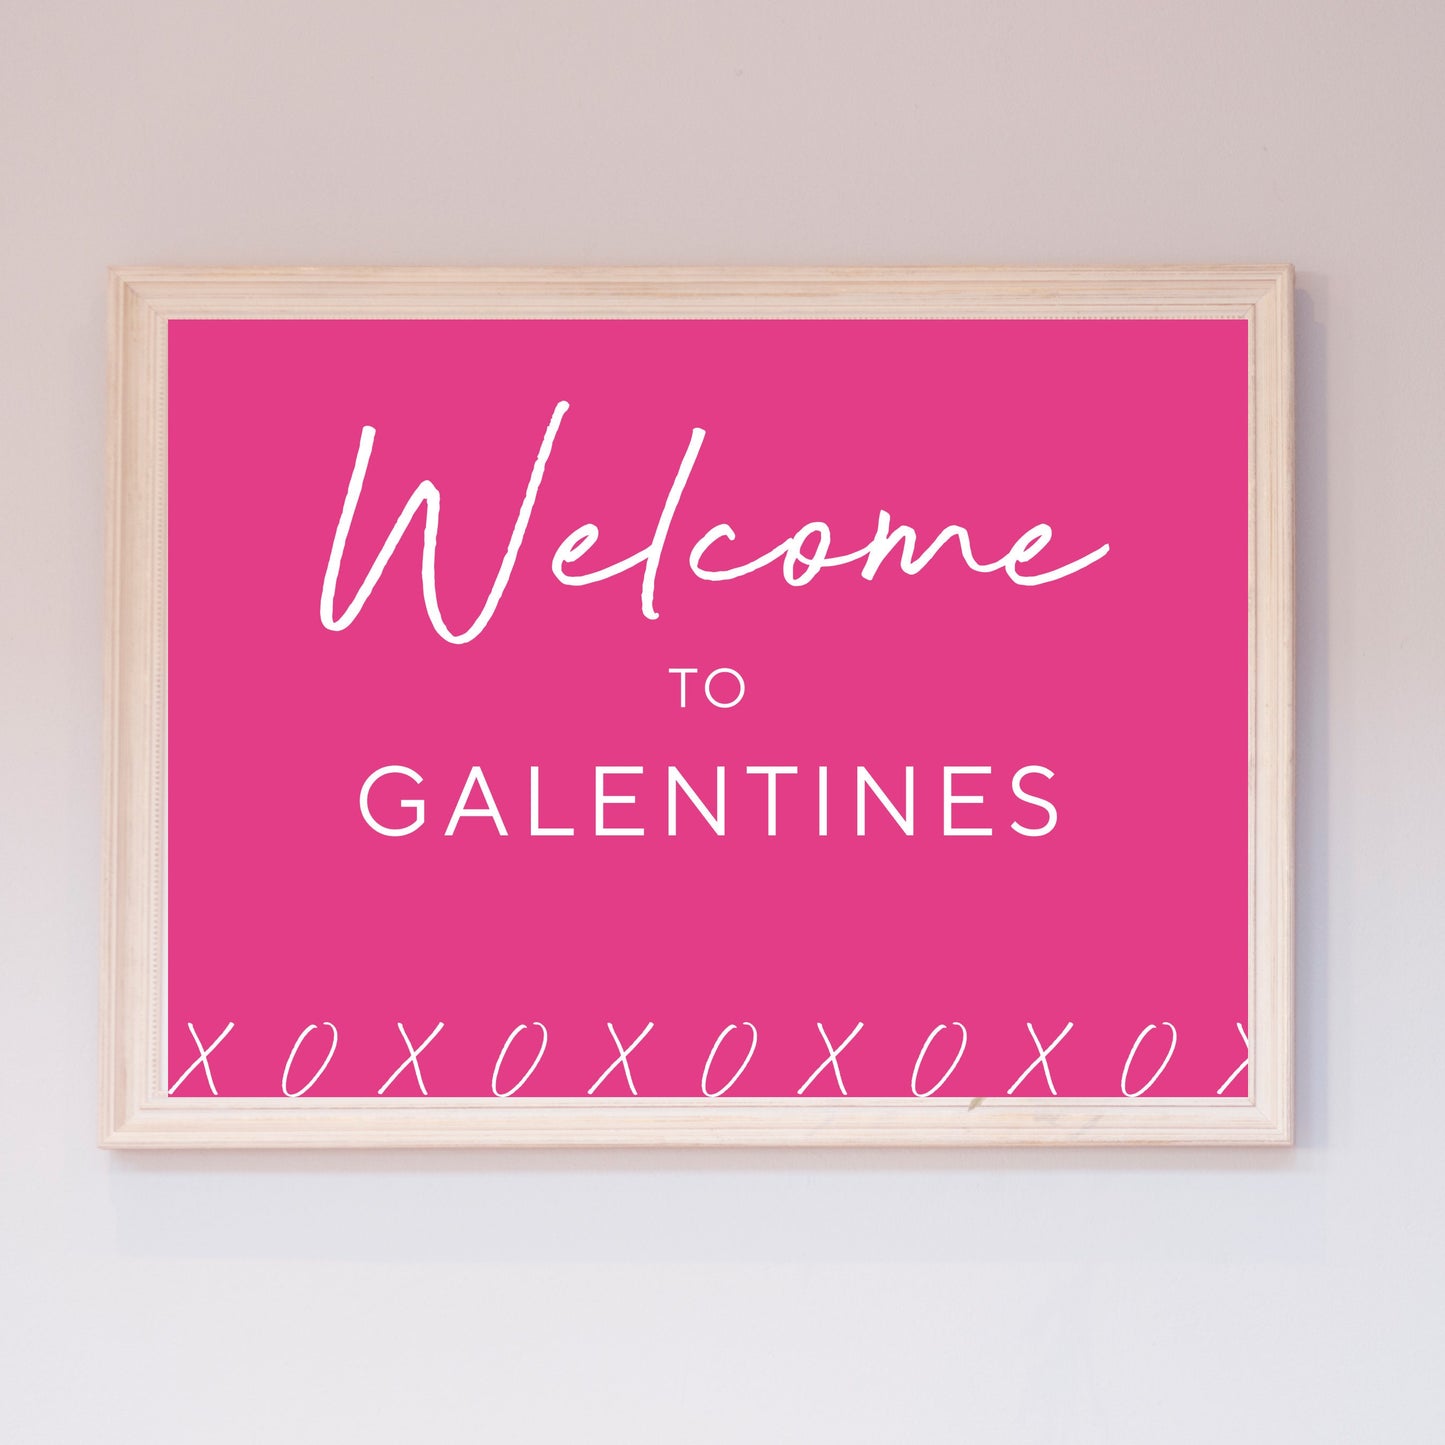 Printable Galentines Party Pack